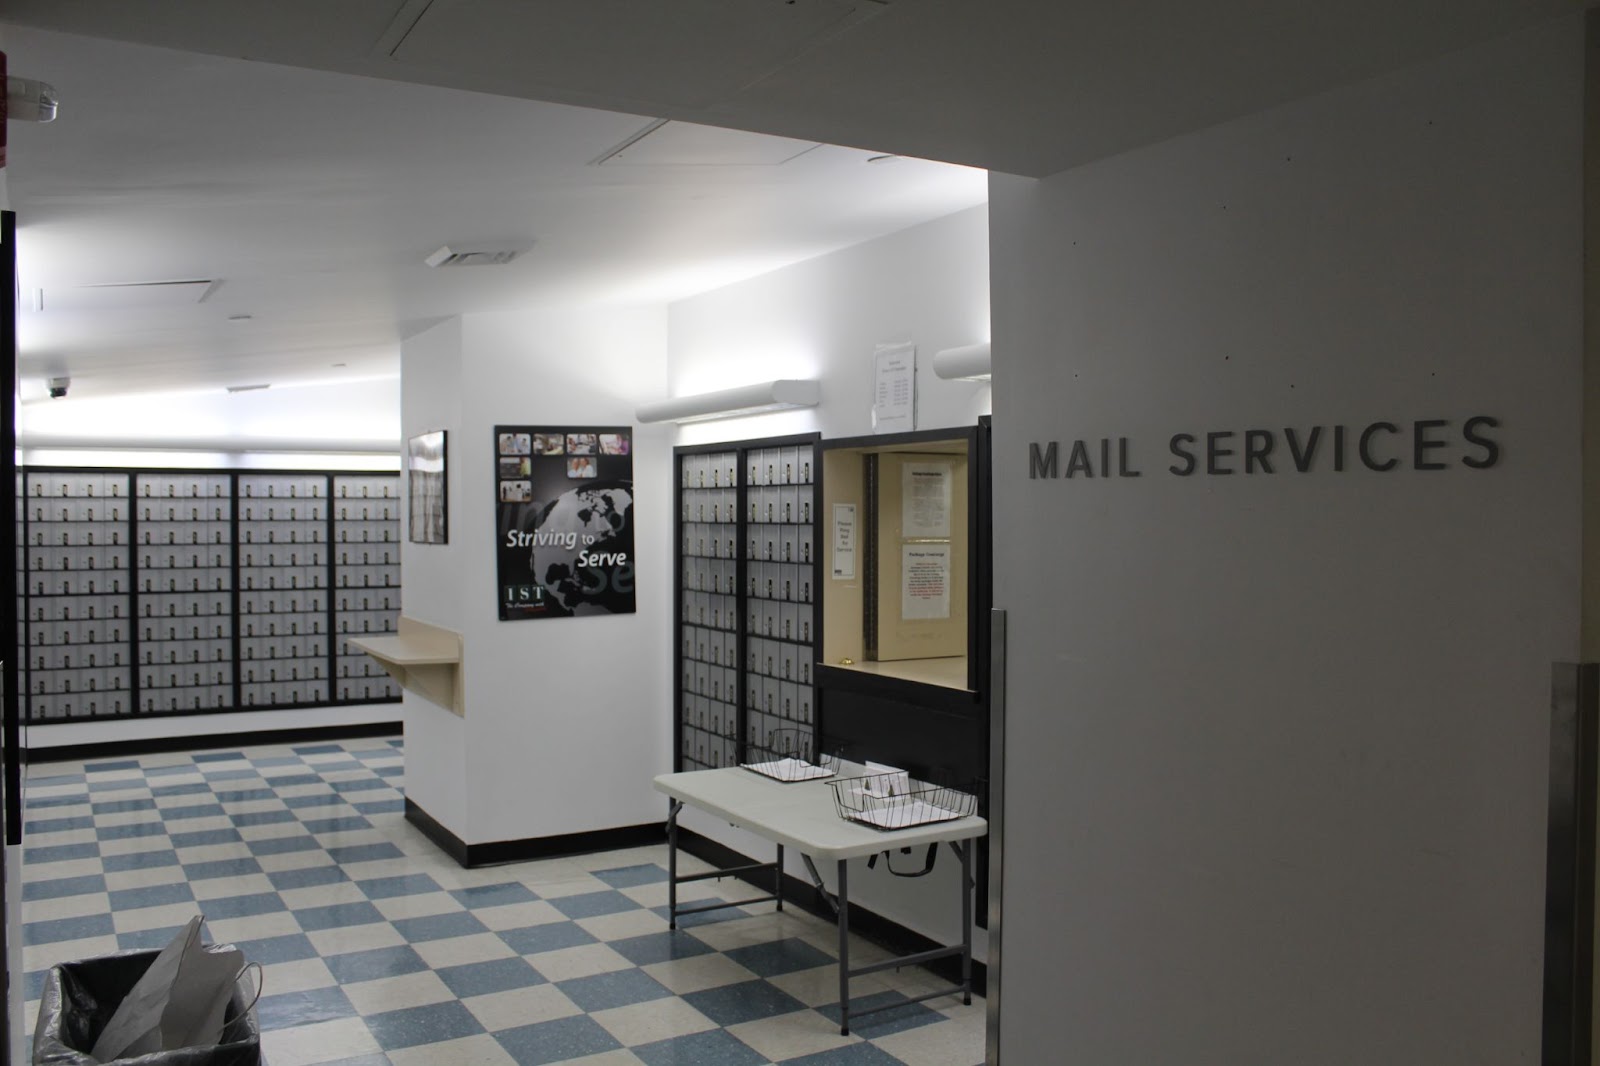 A mailroom with signage reading "Mail Services"